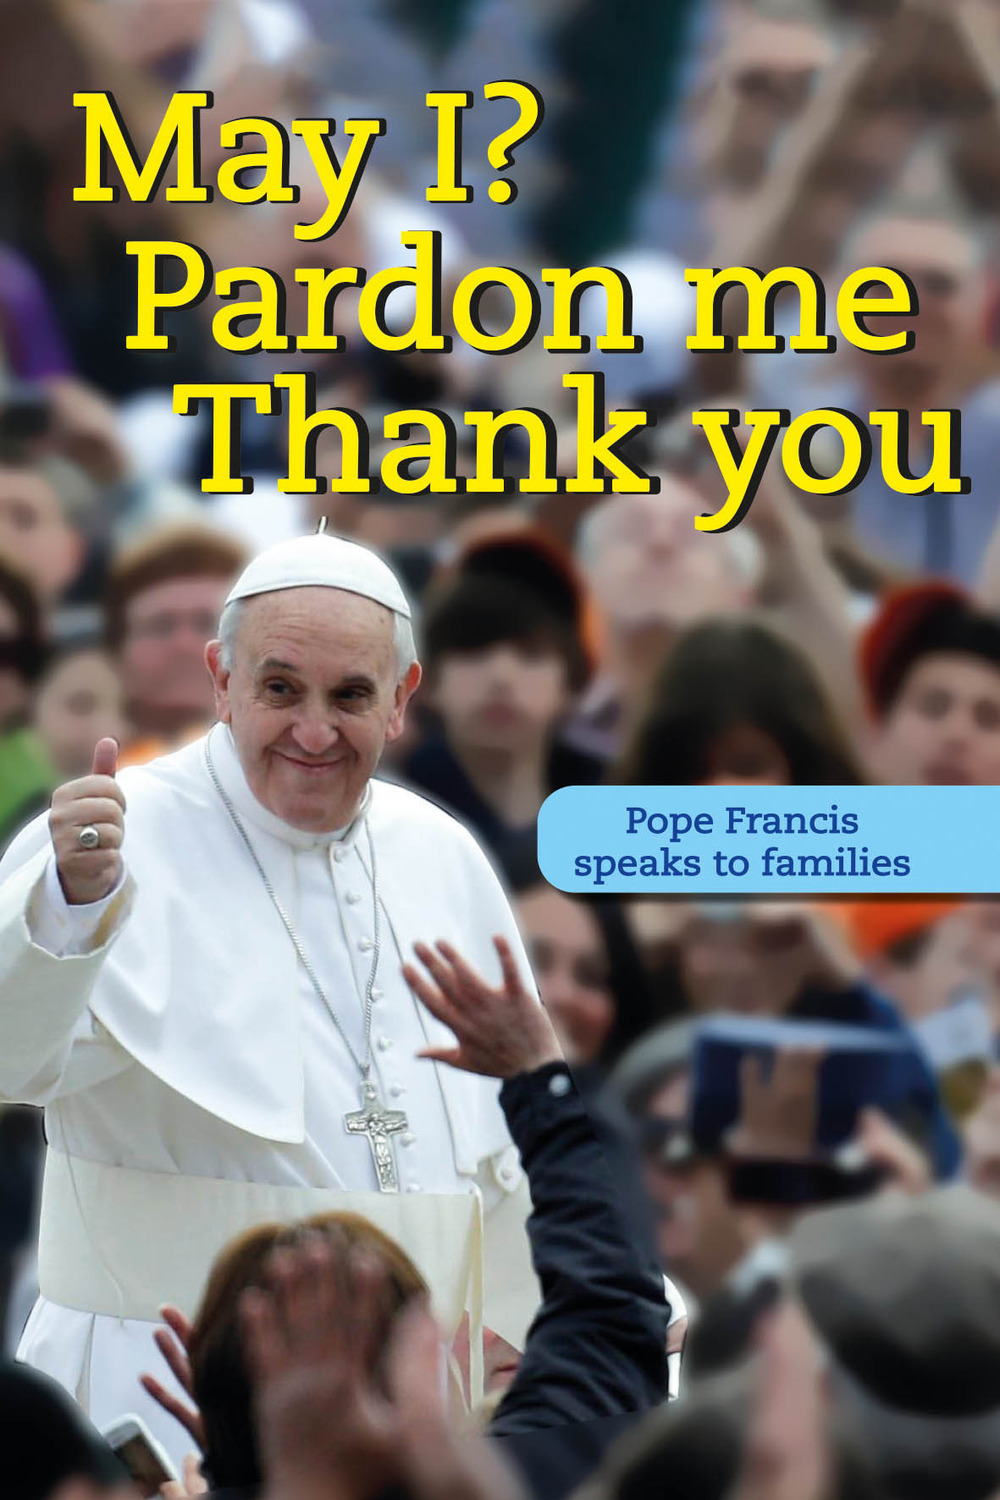 May I? Pardon me thank you. Pope Francis speaks to families